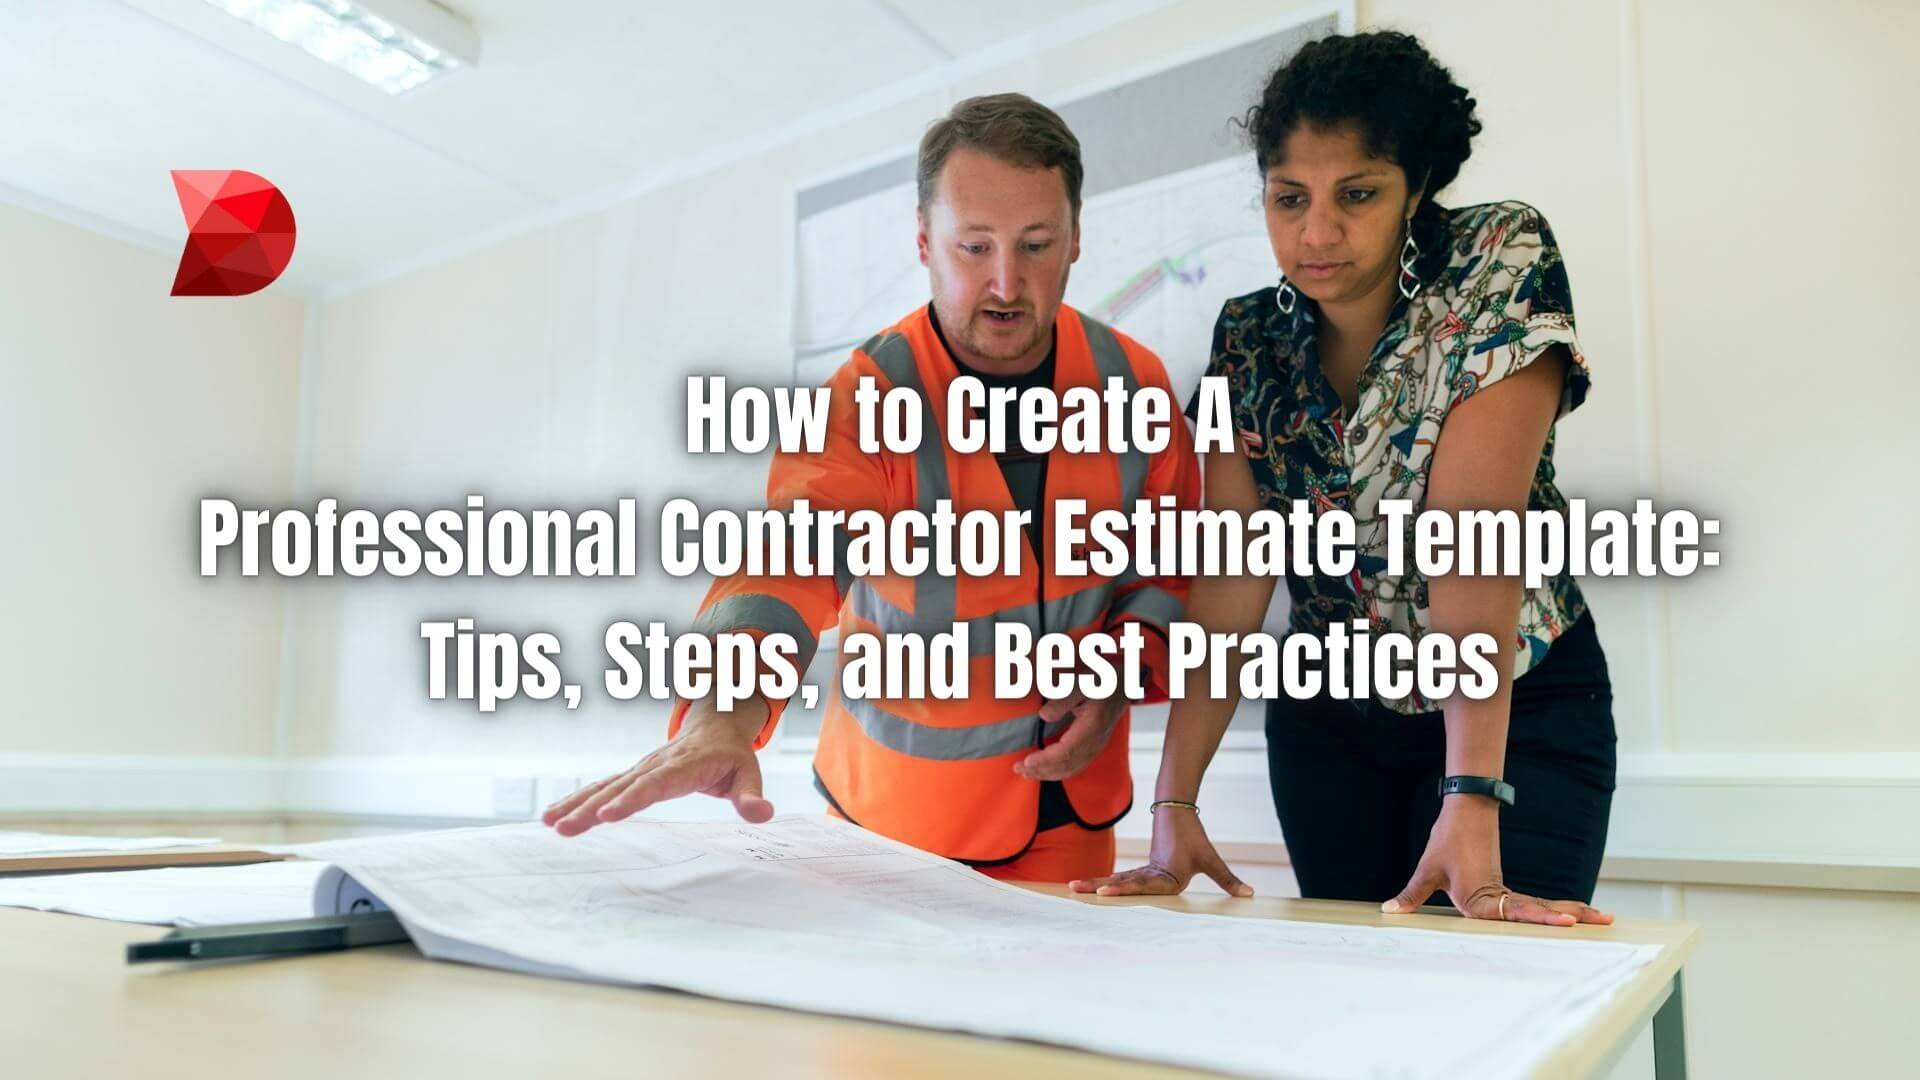 Make professional contractor estimate templates effortlessly. Click here to learn essential steps, expert tips, and industry best practices.